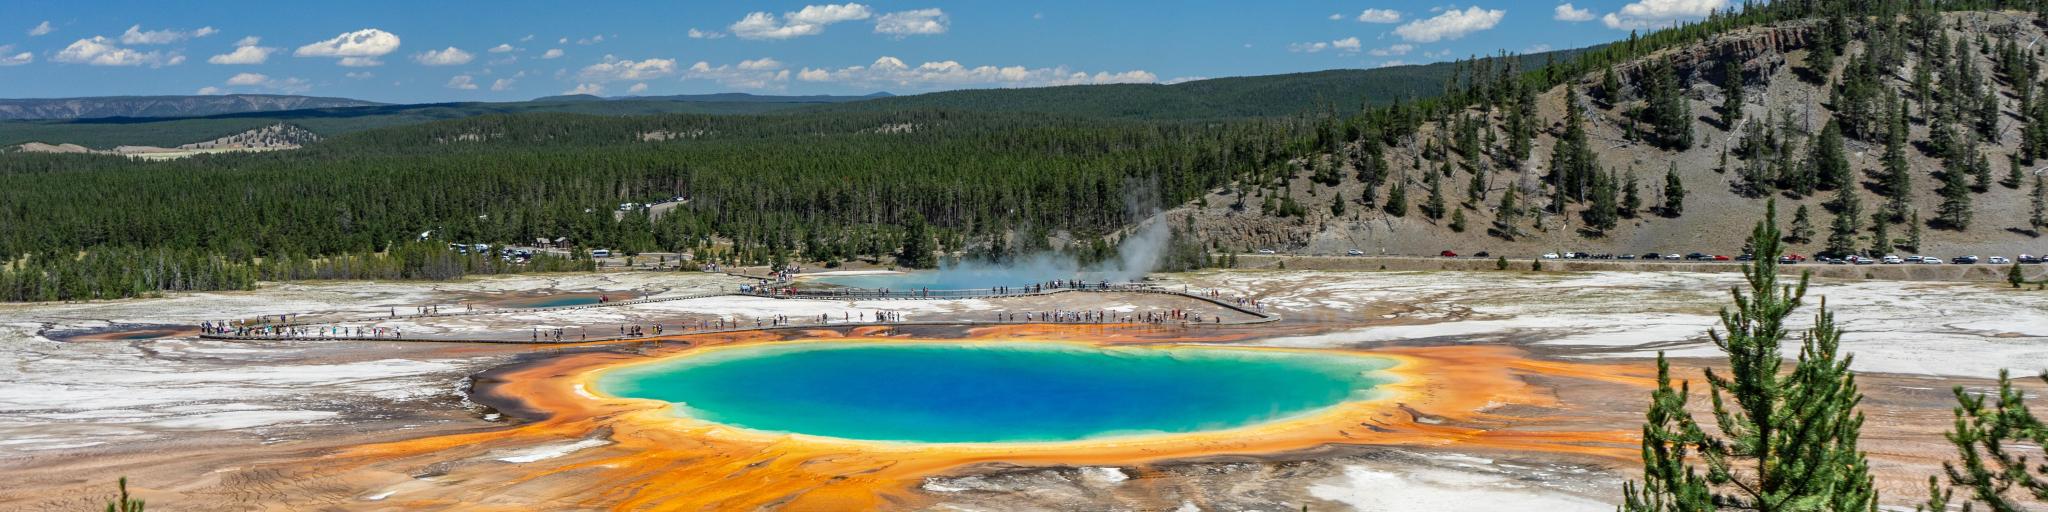 Grand Prismatic Spring in Yellowstone National Park, Wyoming, USA taken on a sunny day with trees in the foreground and the rainbow colored water in the middle.